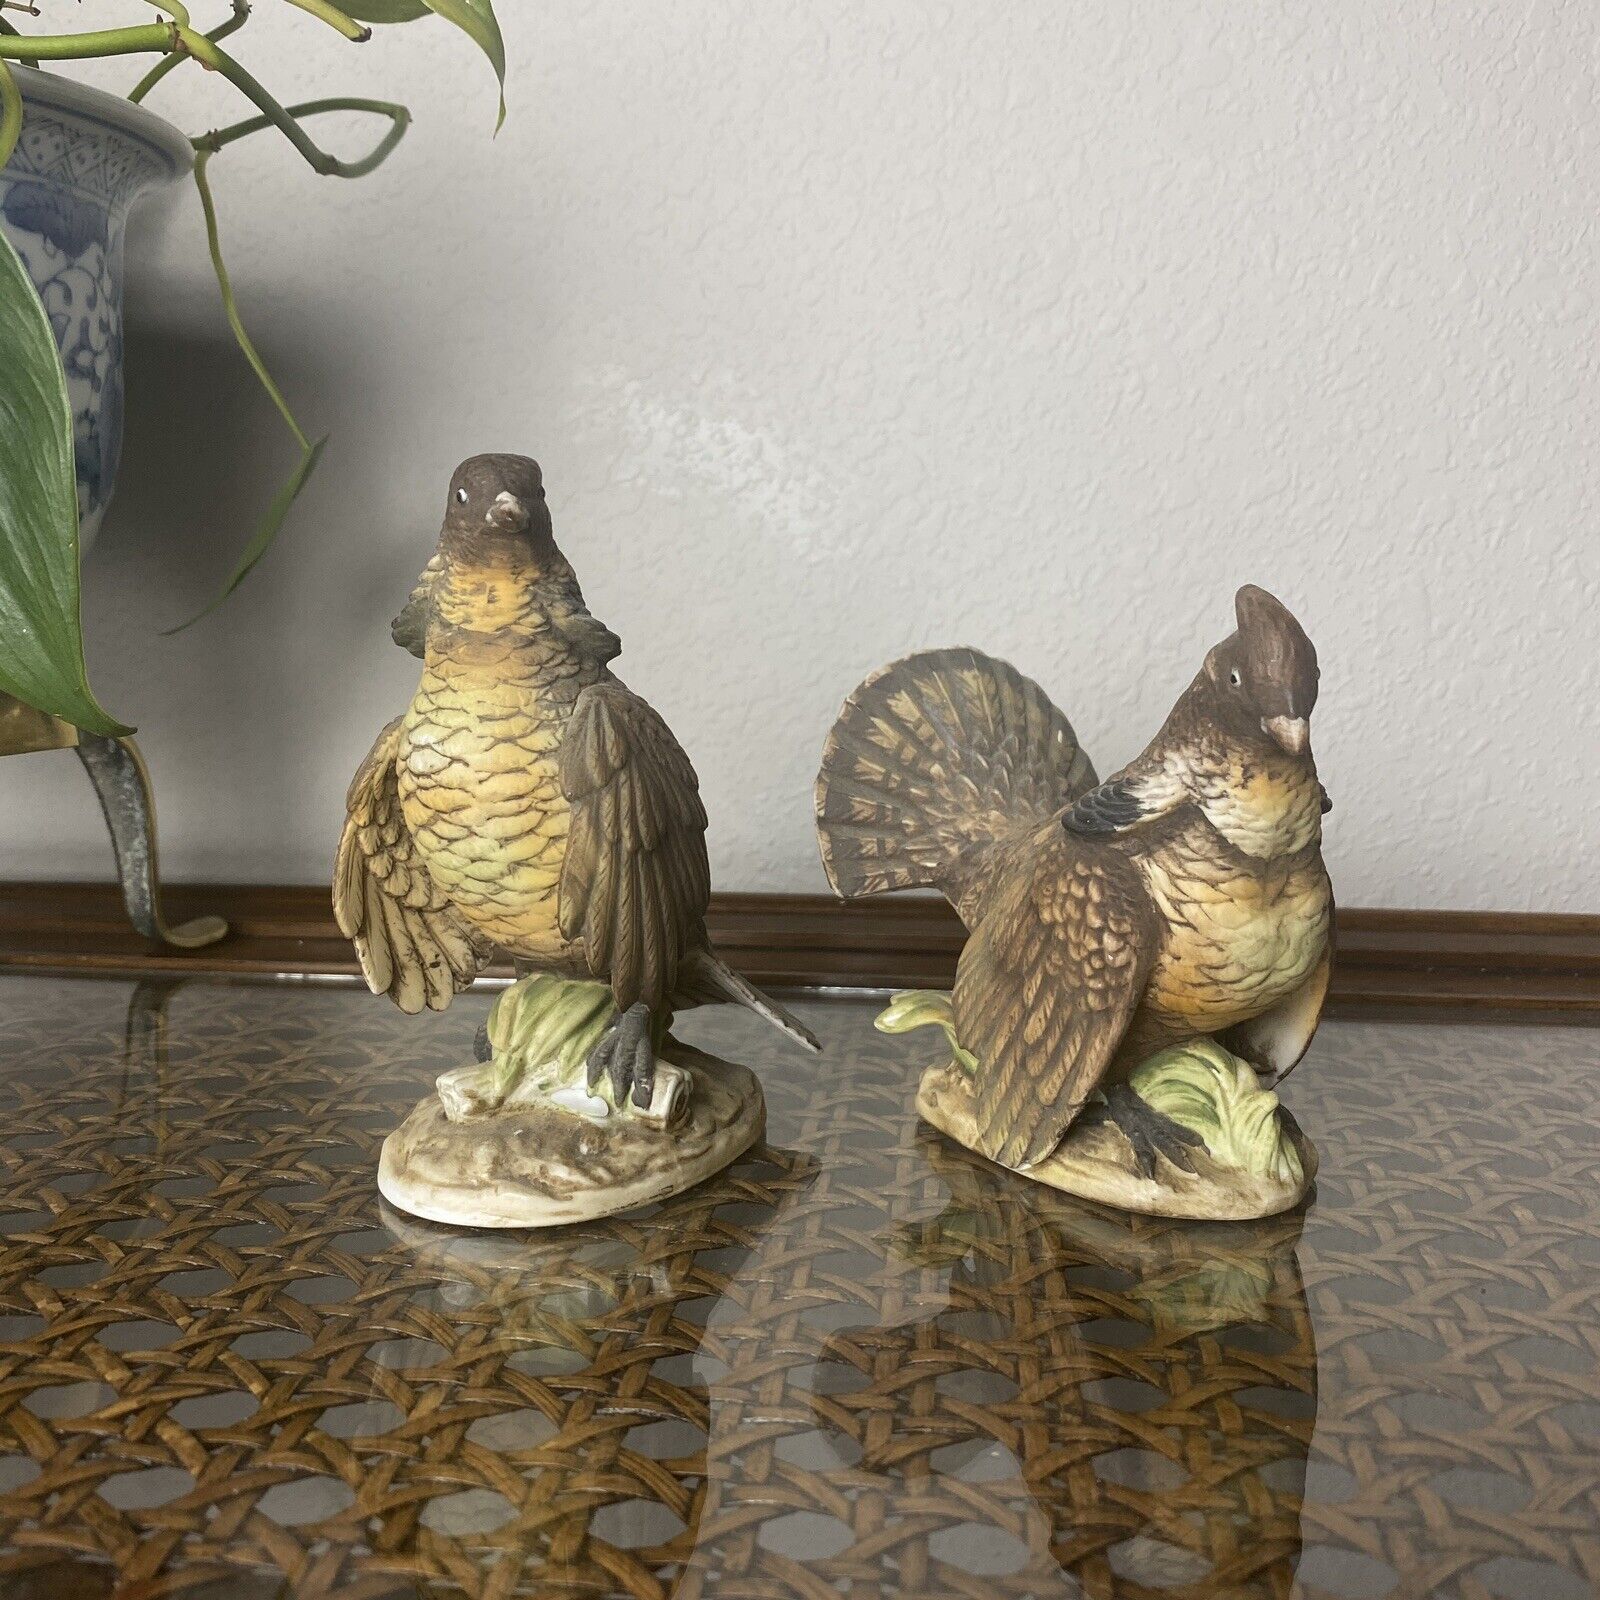 Vintage Lefton China Ruffled Grouse Figures Matched Pair Hand Painted KW2668-A&B